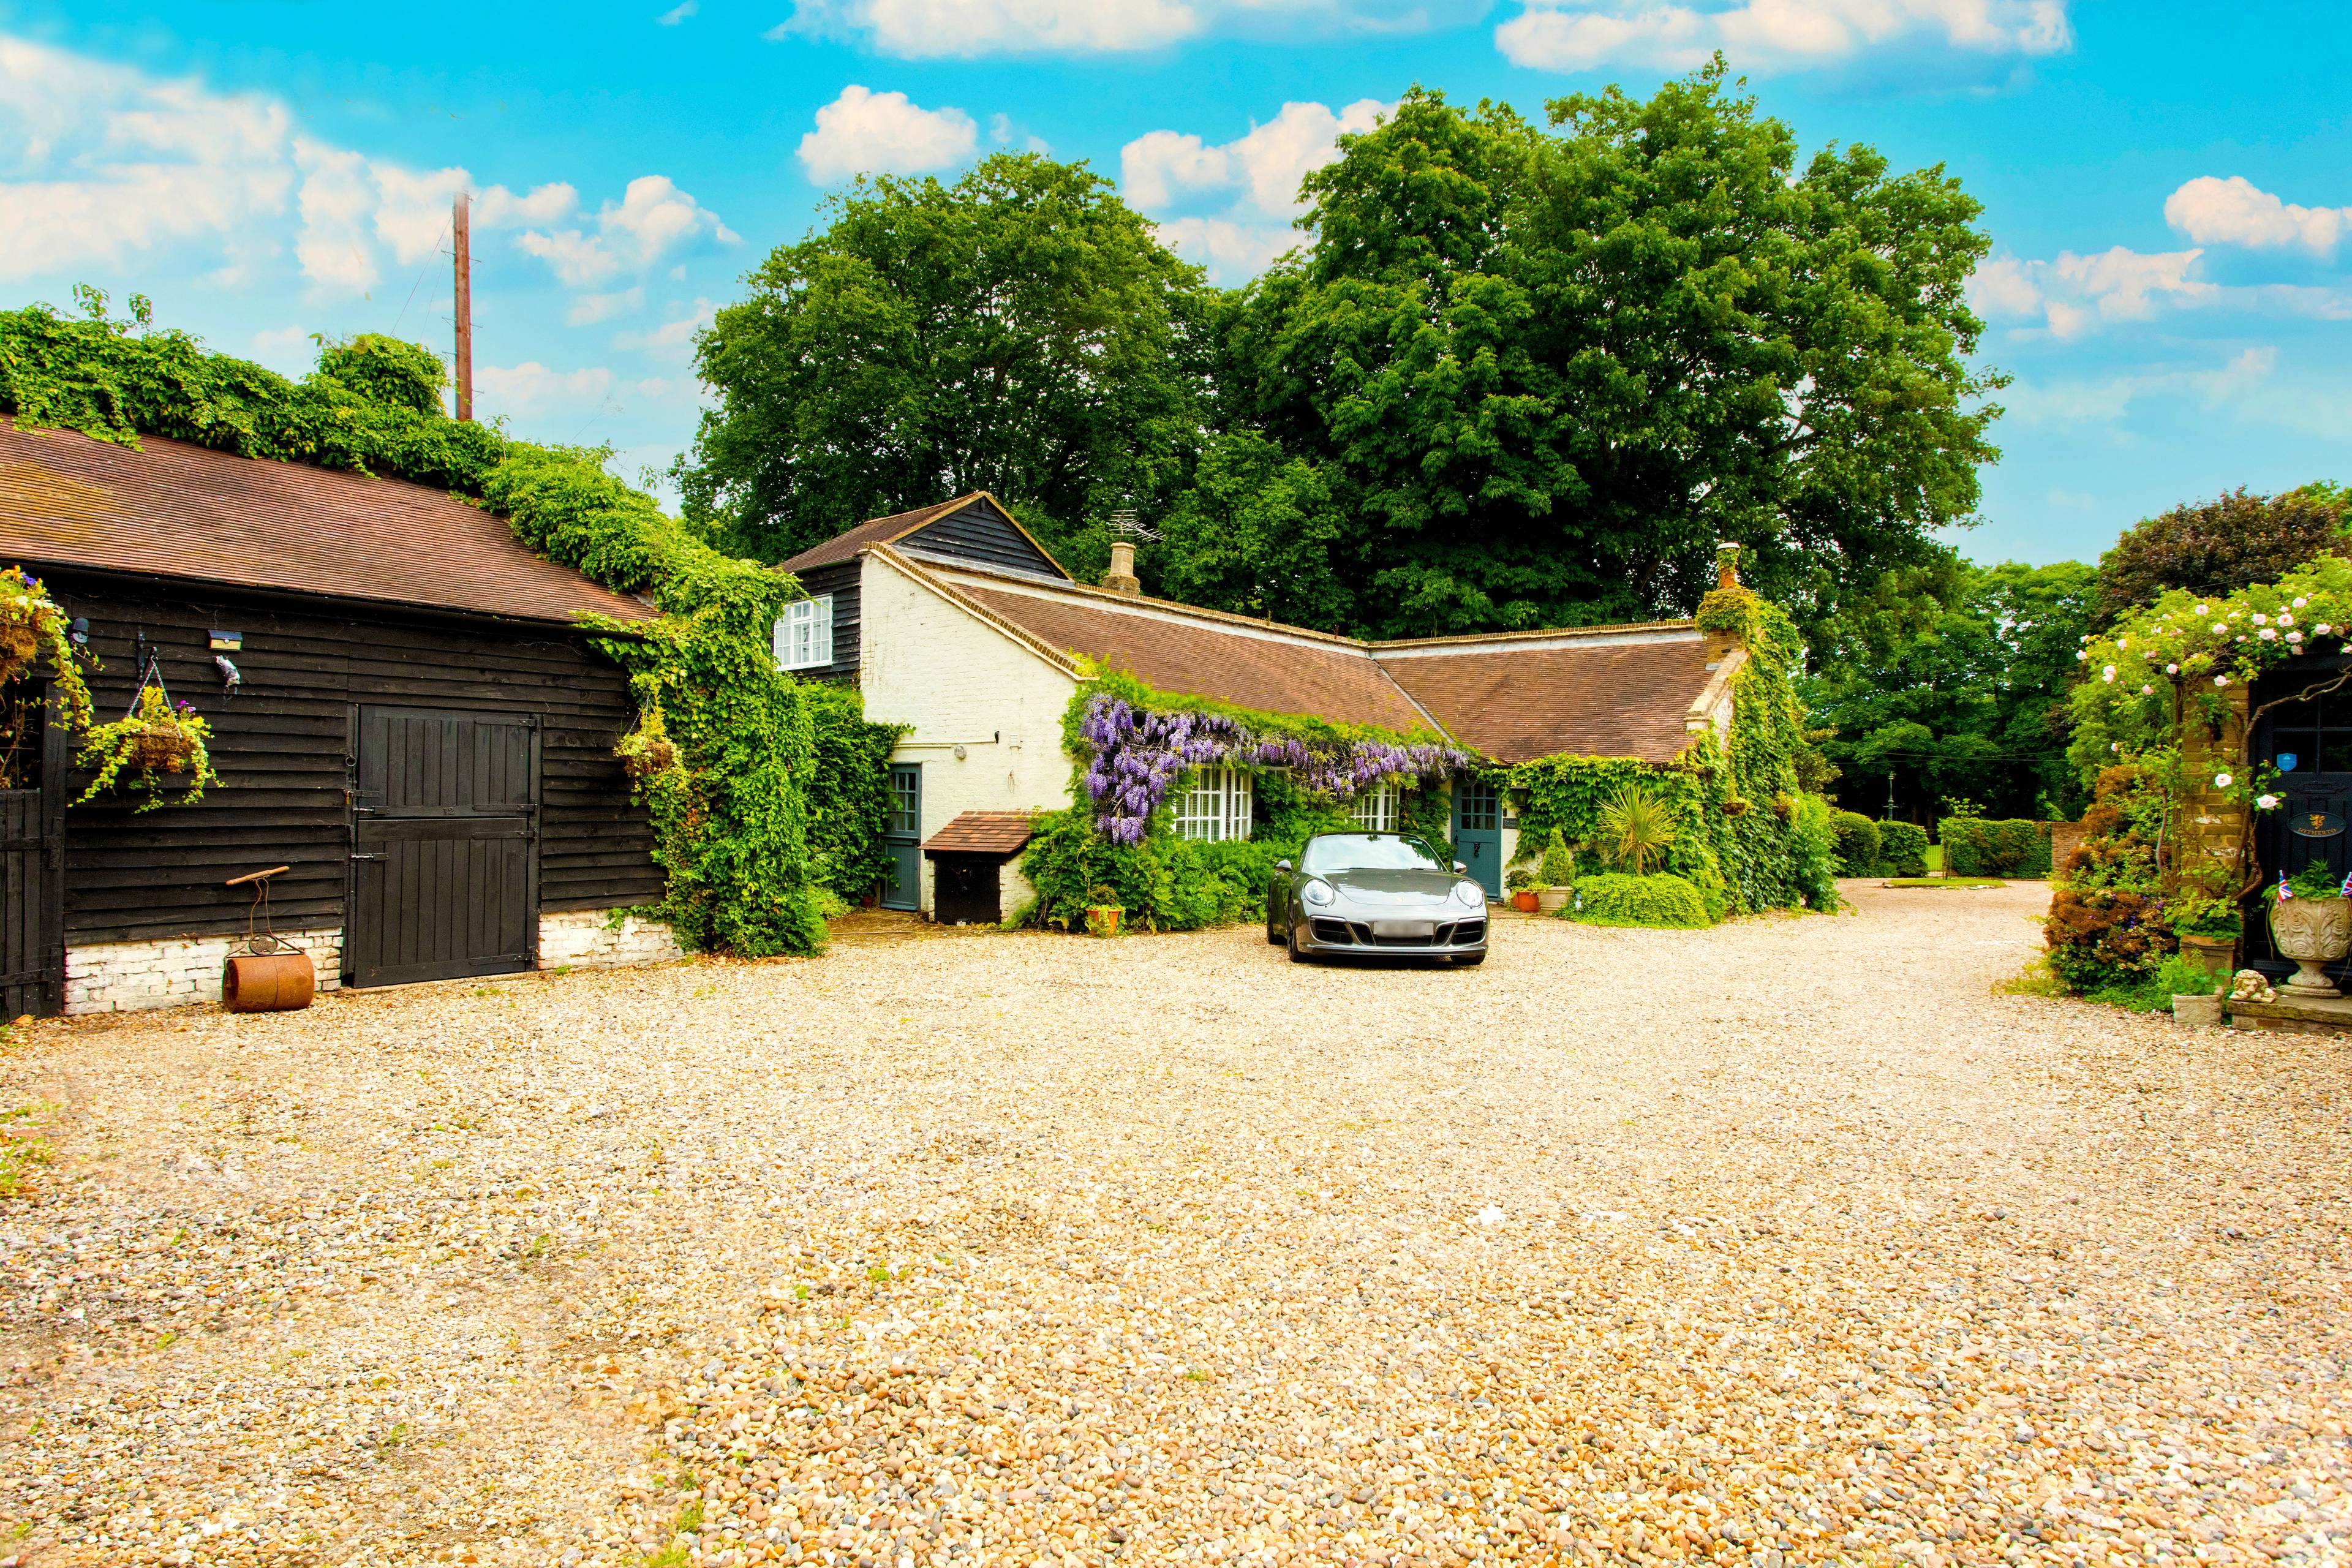 4 Bedroom Detached House For Sale in The Private Theobalds Park Estate, Hertfordshire. A must see property to understand the setting and the developing opportunities